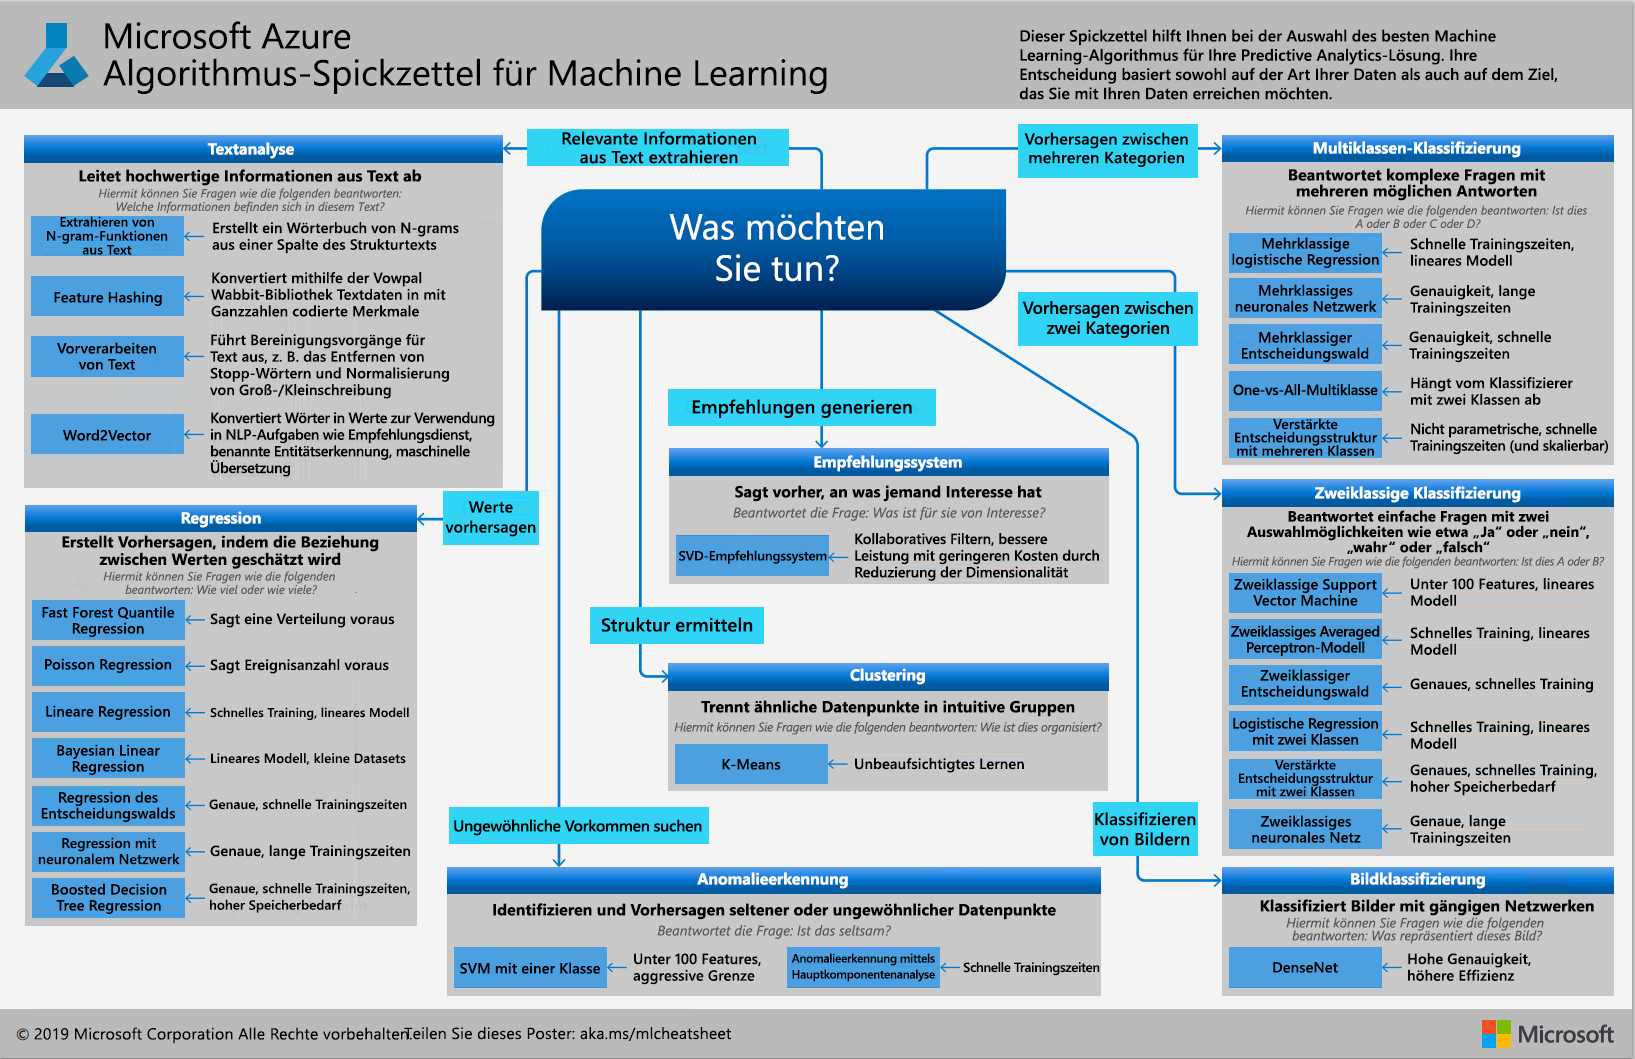 Flowchart-style diagram of the Machine Learning Algorithm Cheat Sheet.